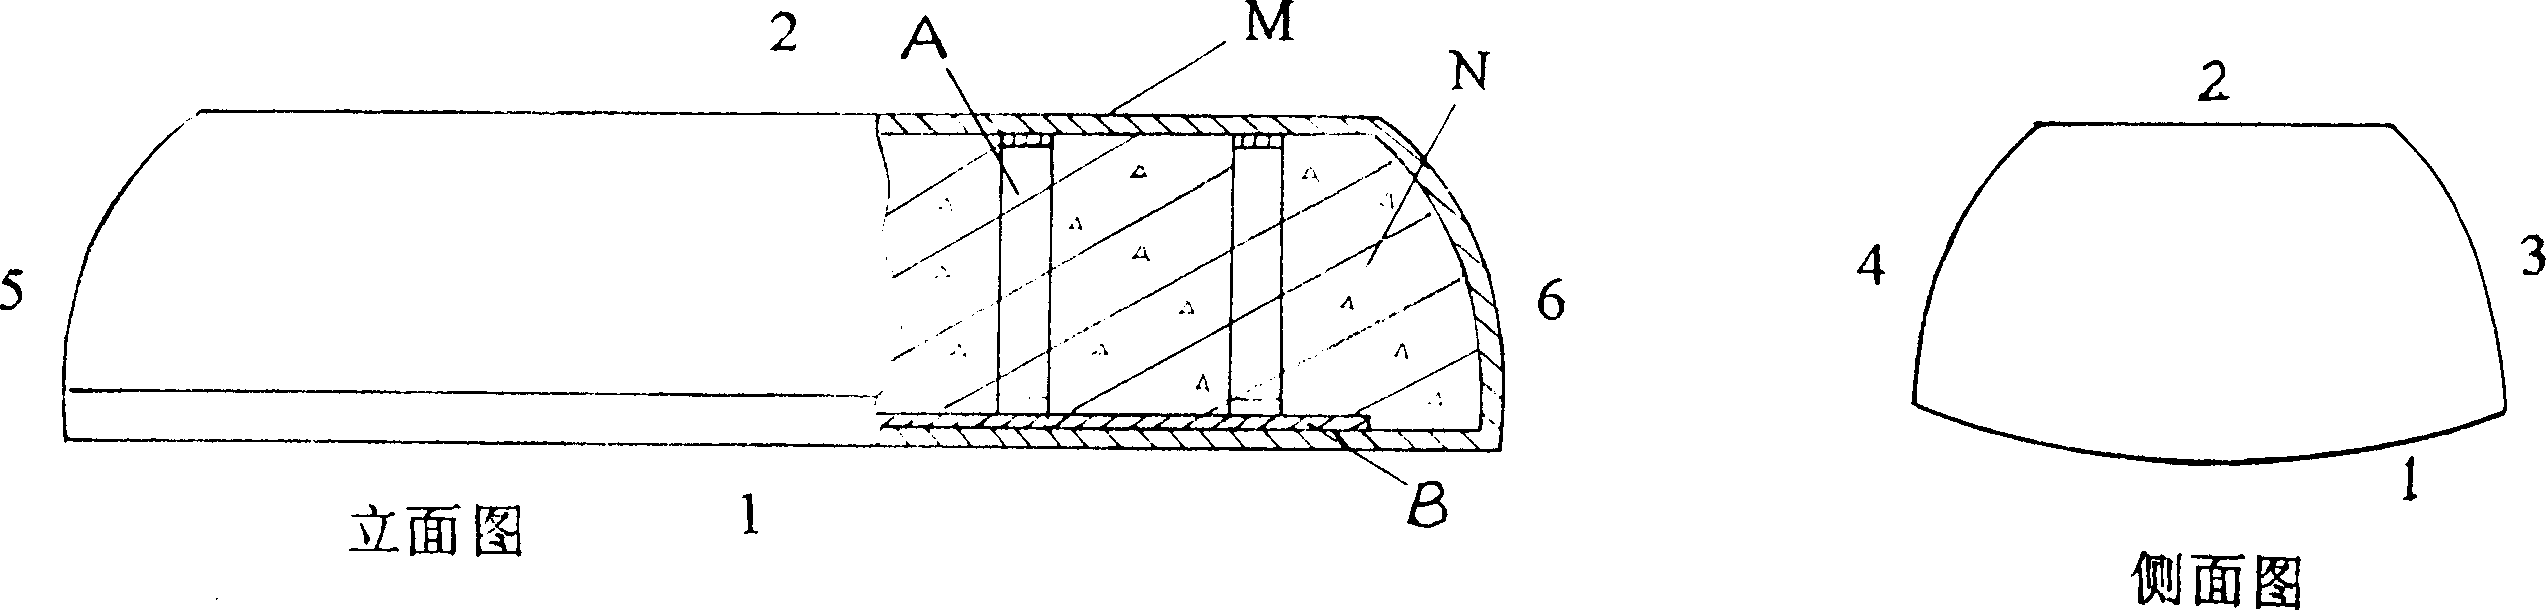 Flexible dam with aid of buoyancy and its construction method